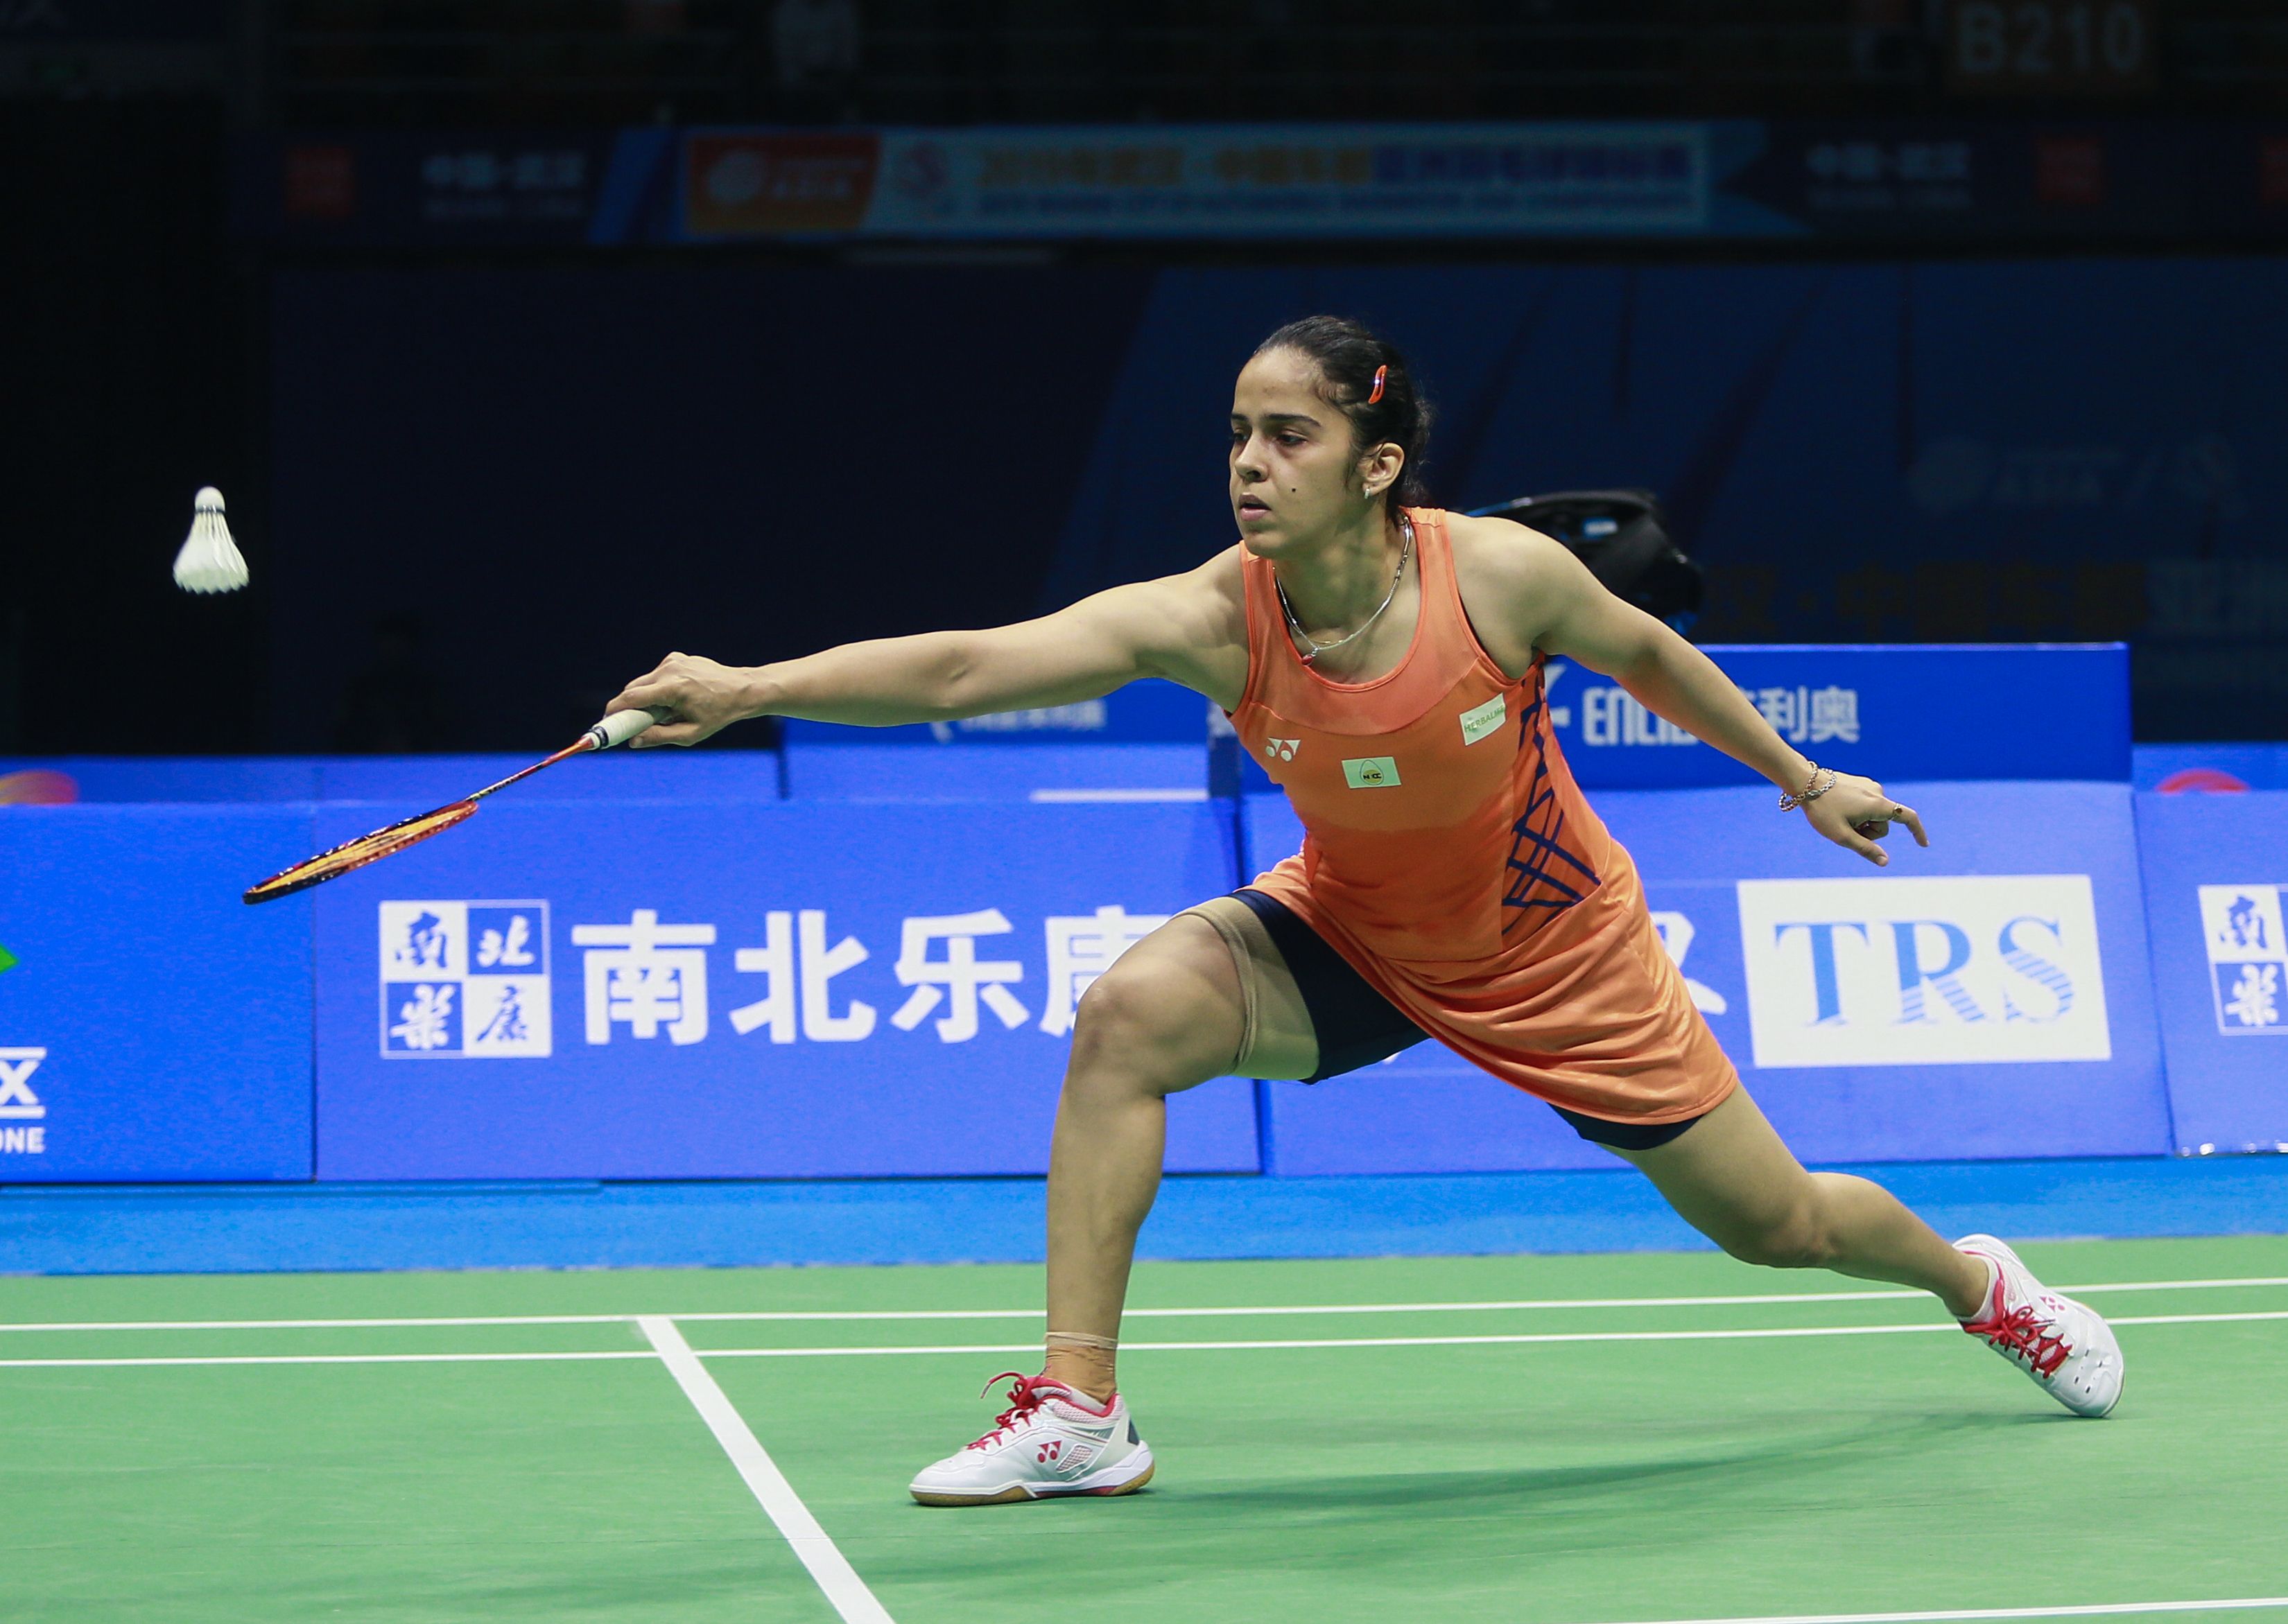 Singapore Open 2022 | Saina Nehwal makes first quarters in 15 months, HS Prannoy and PV Sindhu advance too